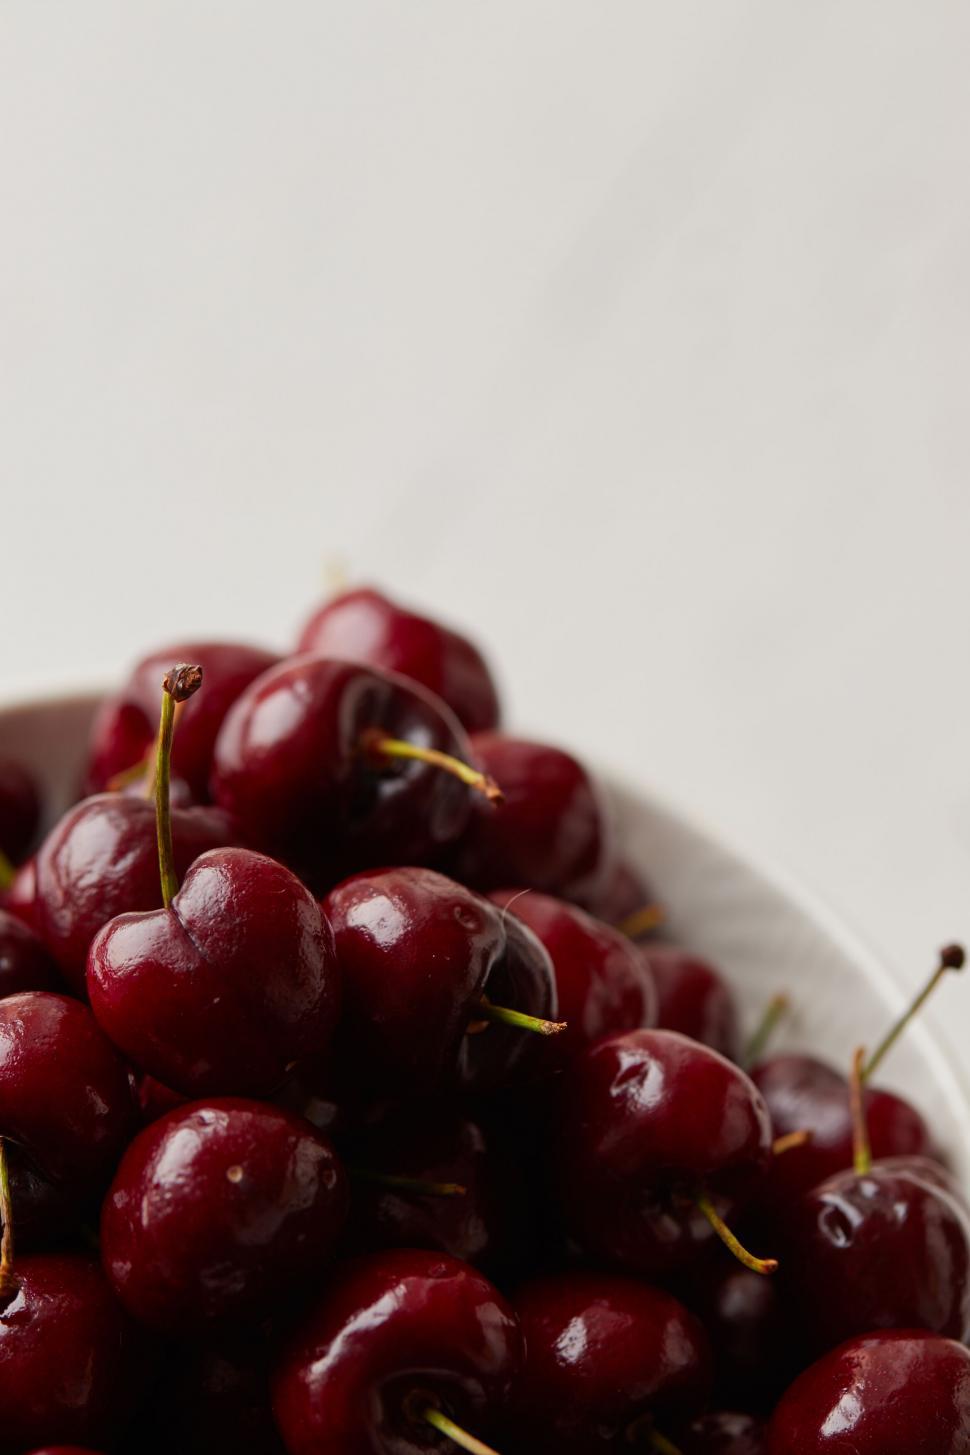 Free Image of Bowl of cherries on a white background 